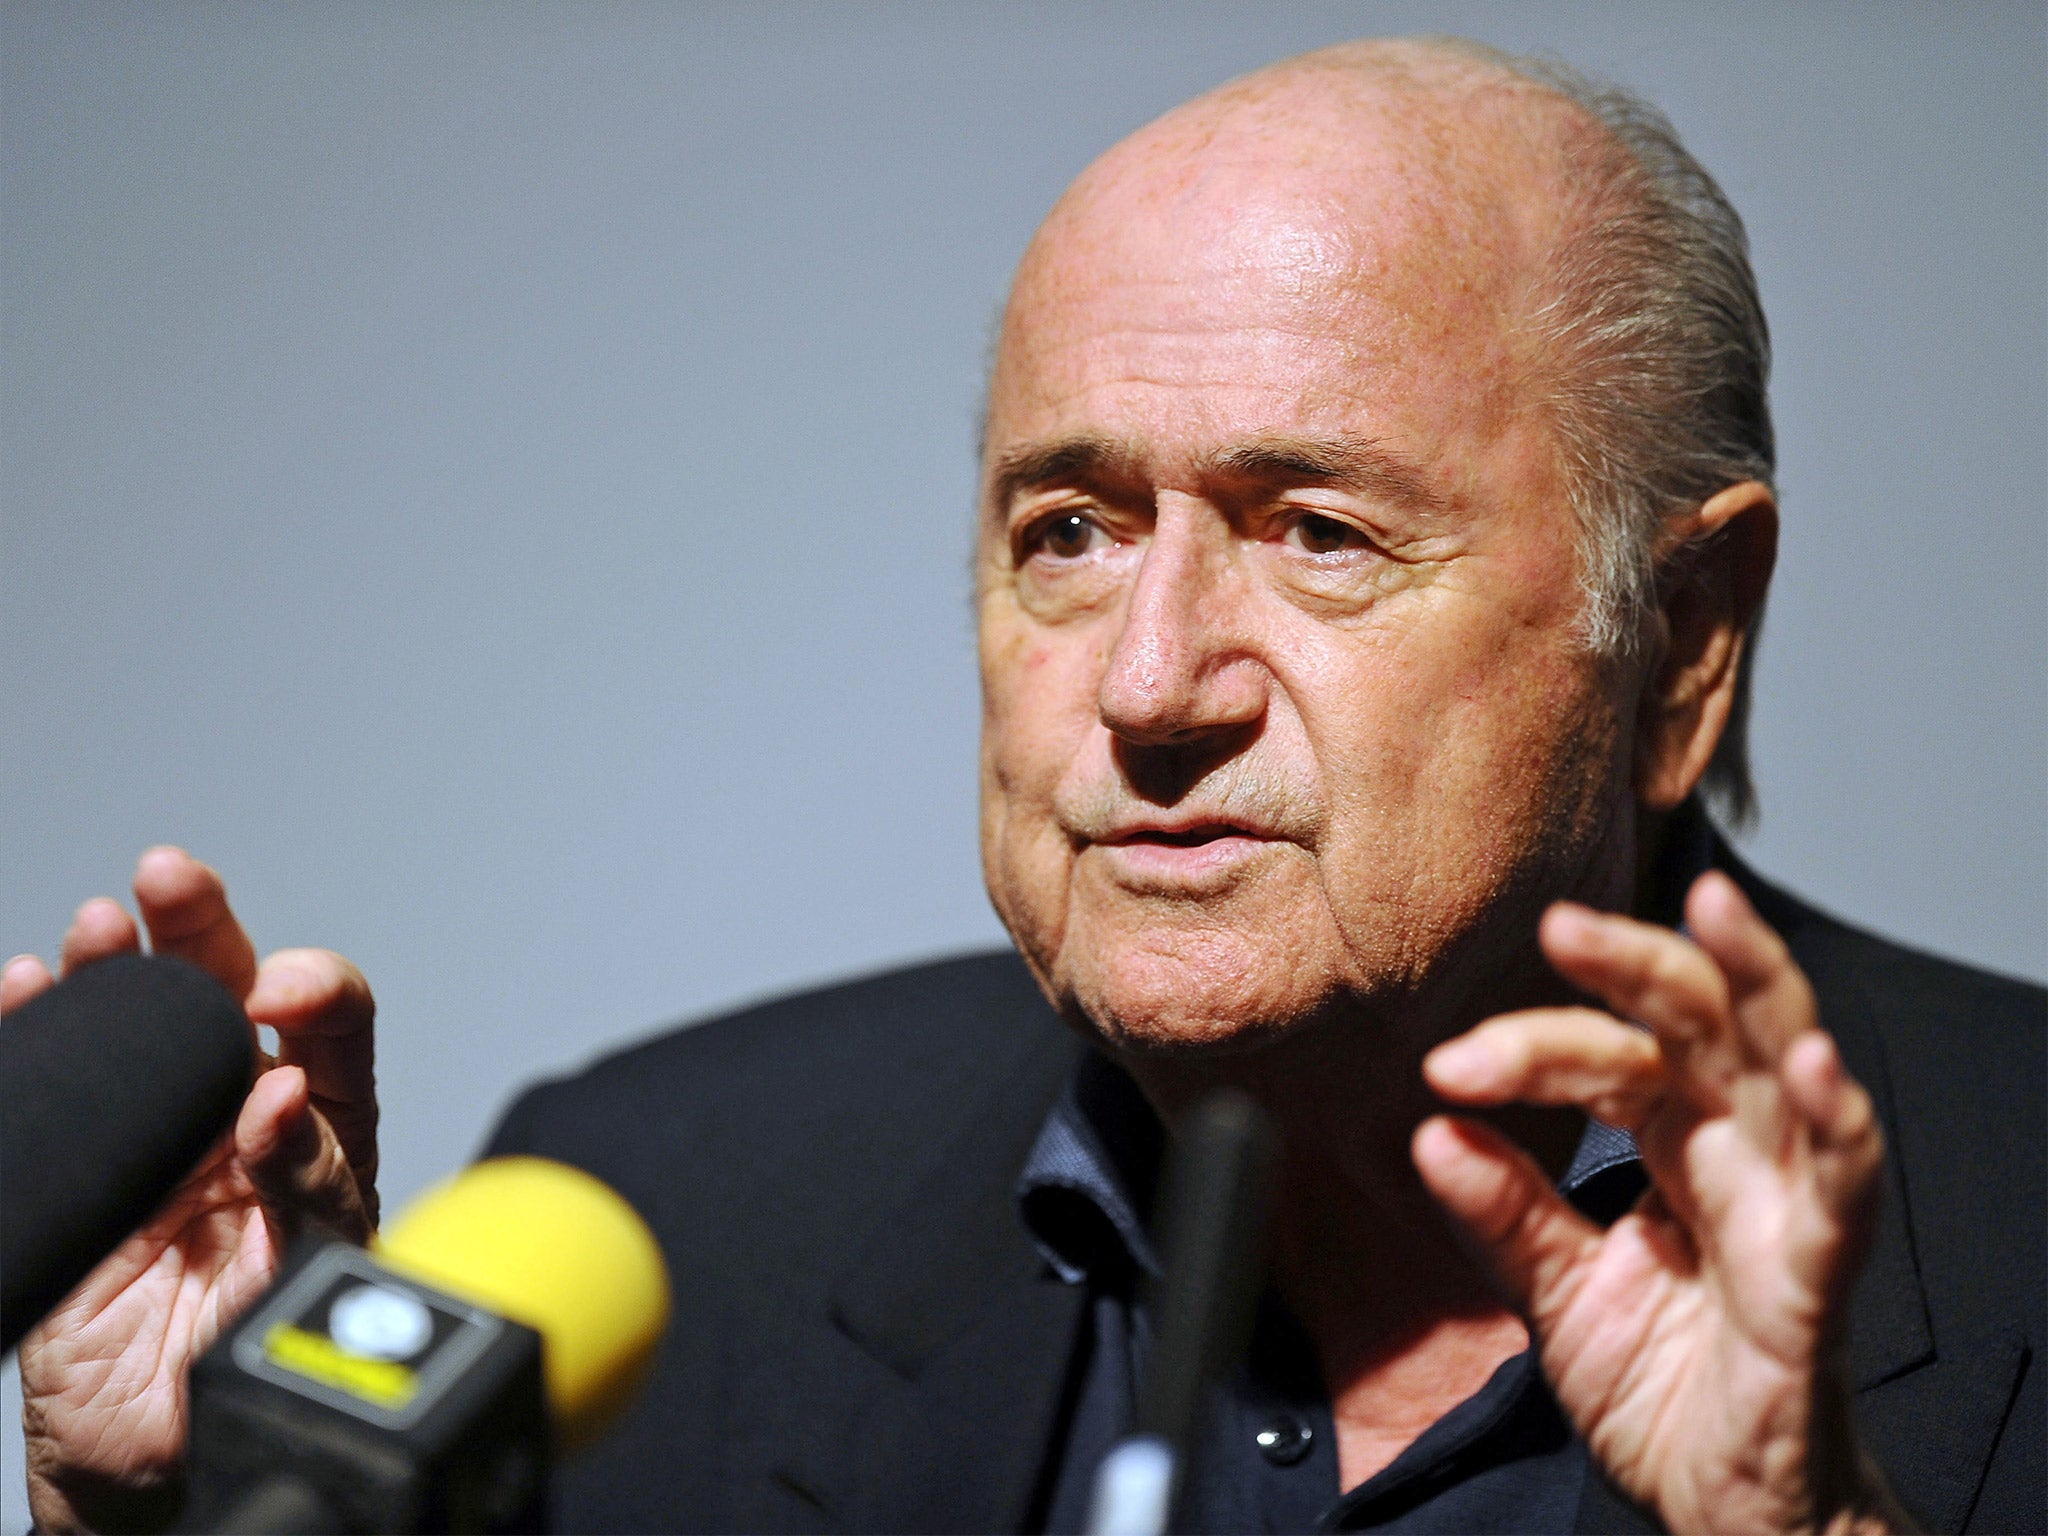 Sepp Blatter has been attacked by Uefa over allegations of misconduct